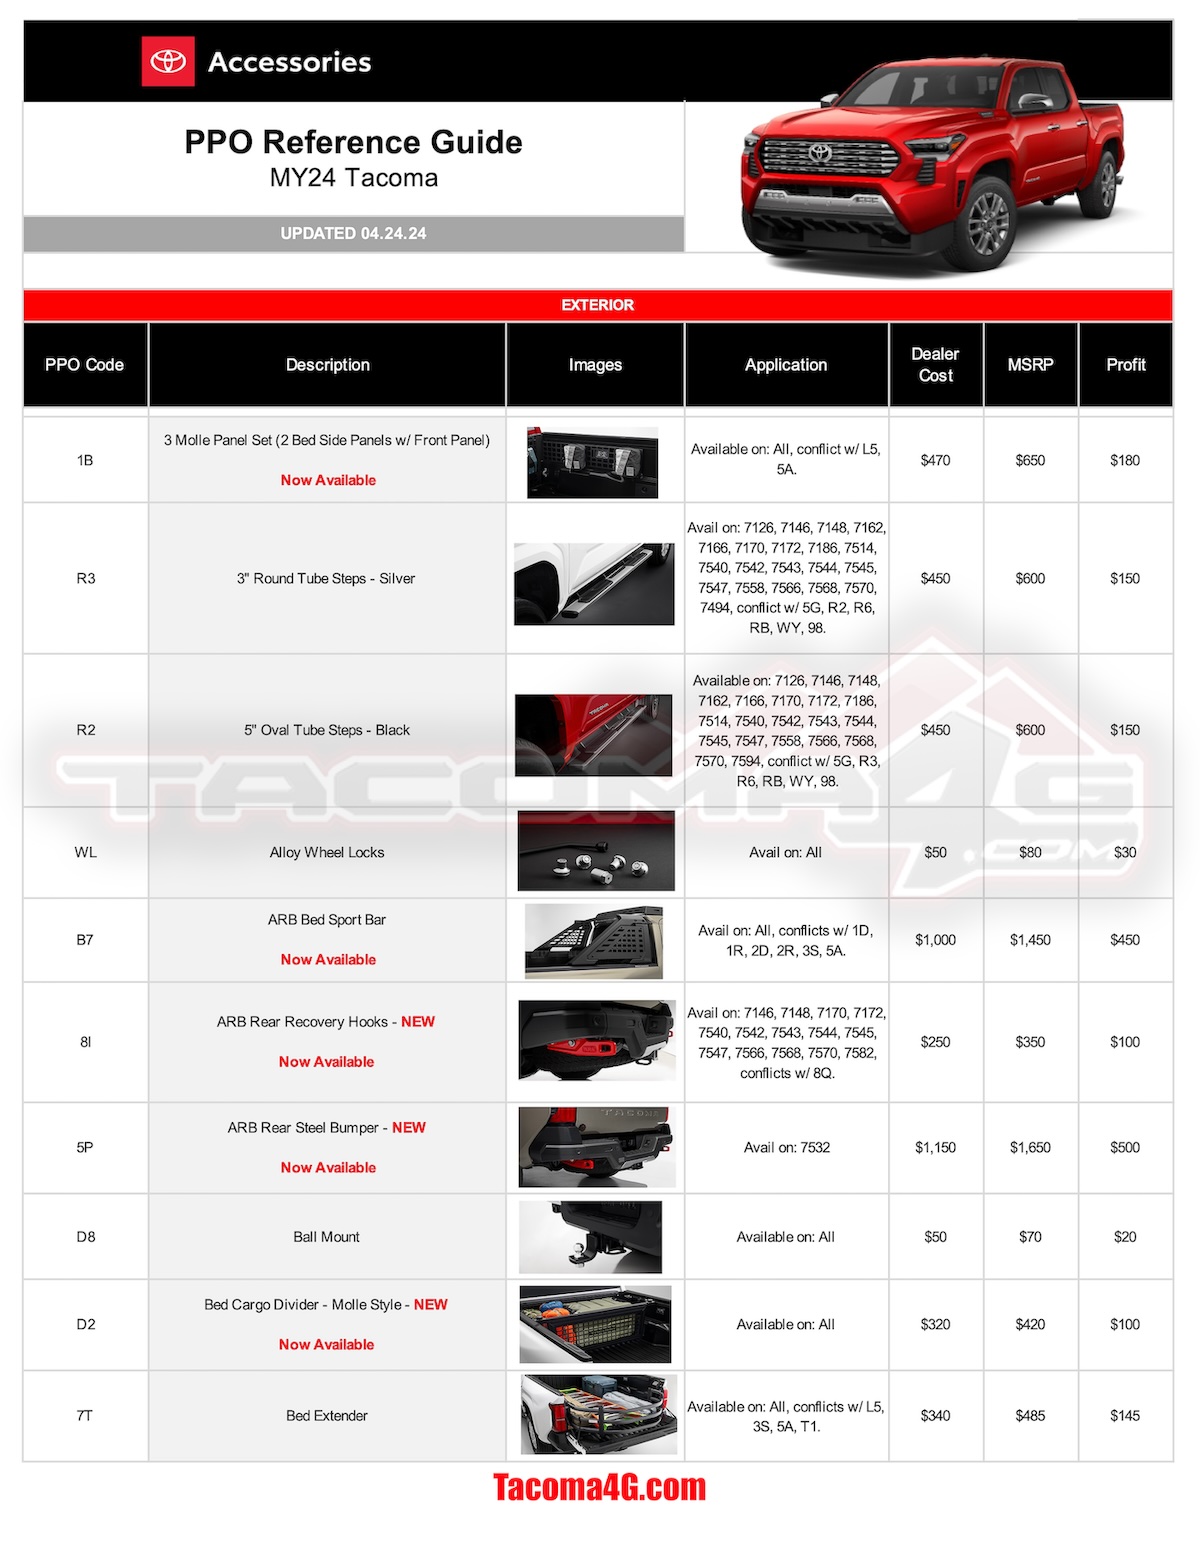 2024 Tacoma 2024 Tacoma Post-Production Options (PPO) Guide - OEM / TRD Accessories Parts + Pricing!  [UPDATED 5-7-24] MY24 Tacoma PPO Guide_04_24_24--1